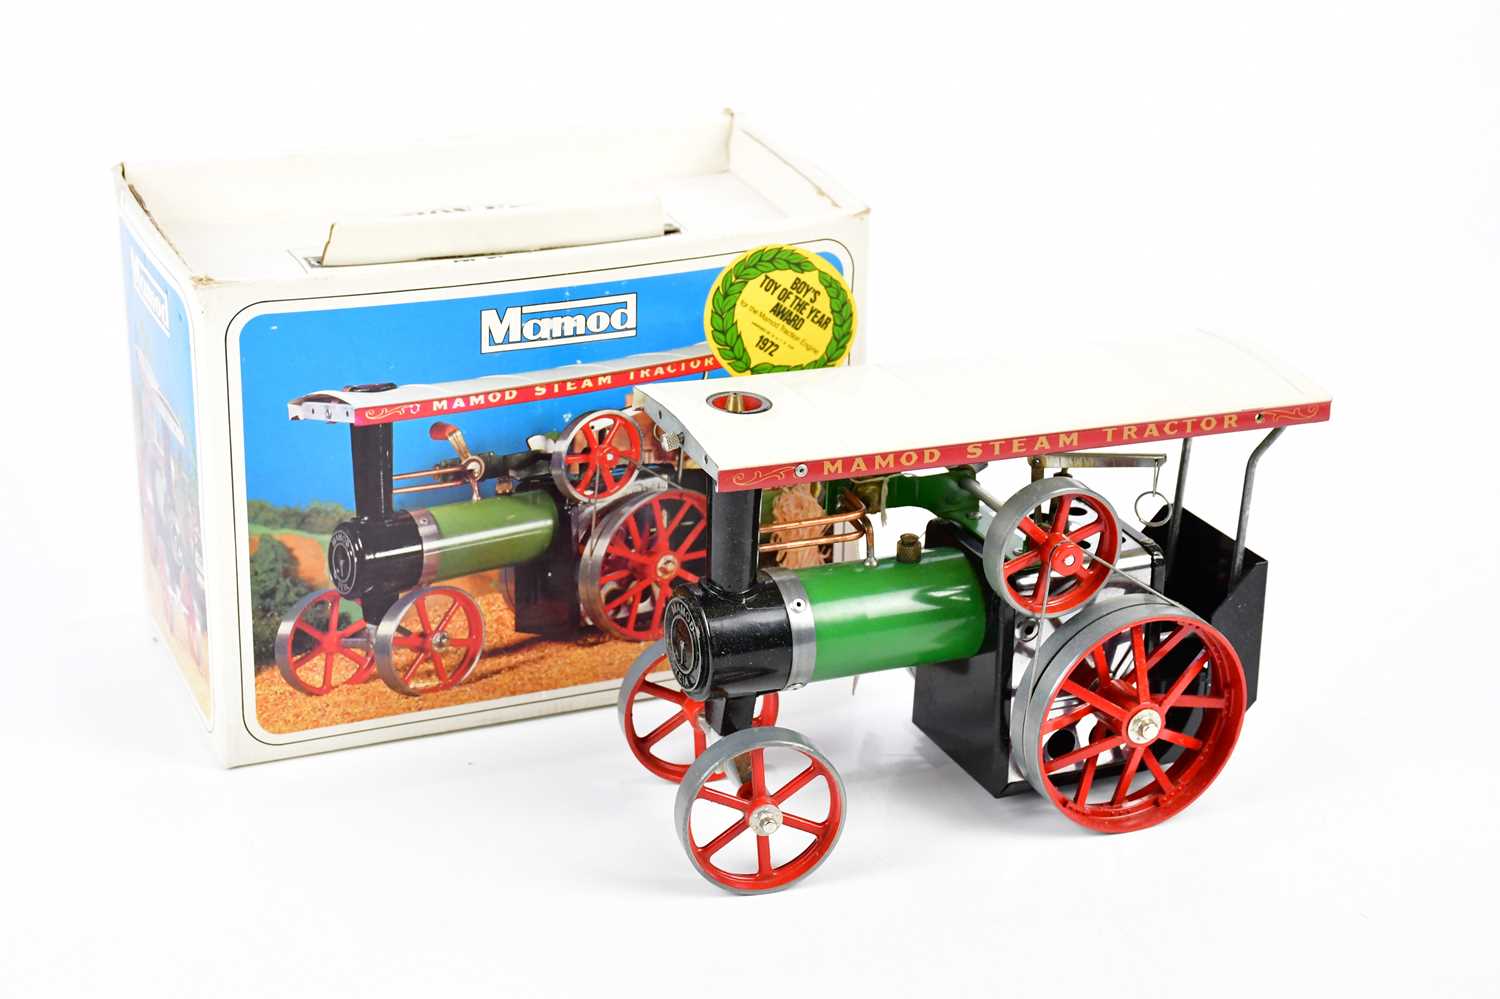 MAMOD; a boxed T.E.1a steam tractor, MAMOD engine mounted on plinth base and a wooden train. - Image 2 of 4